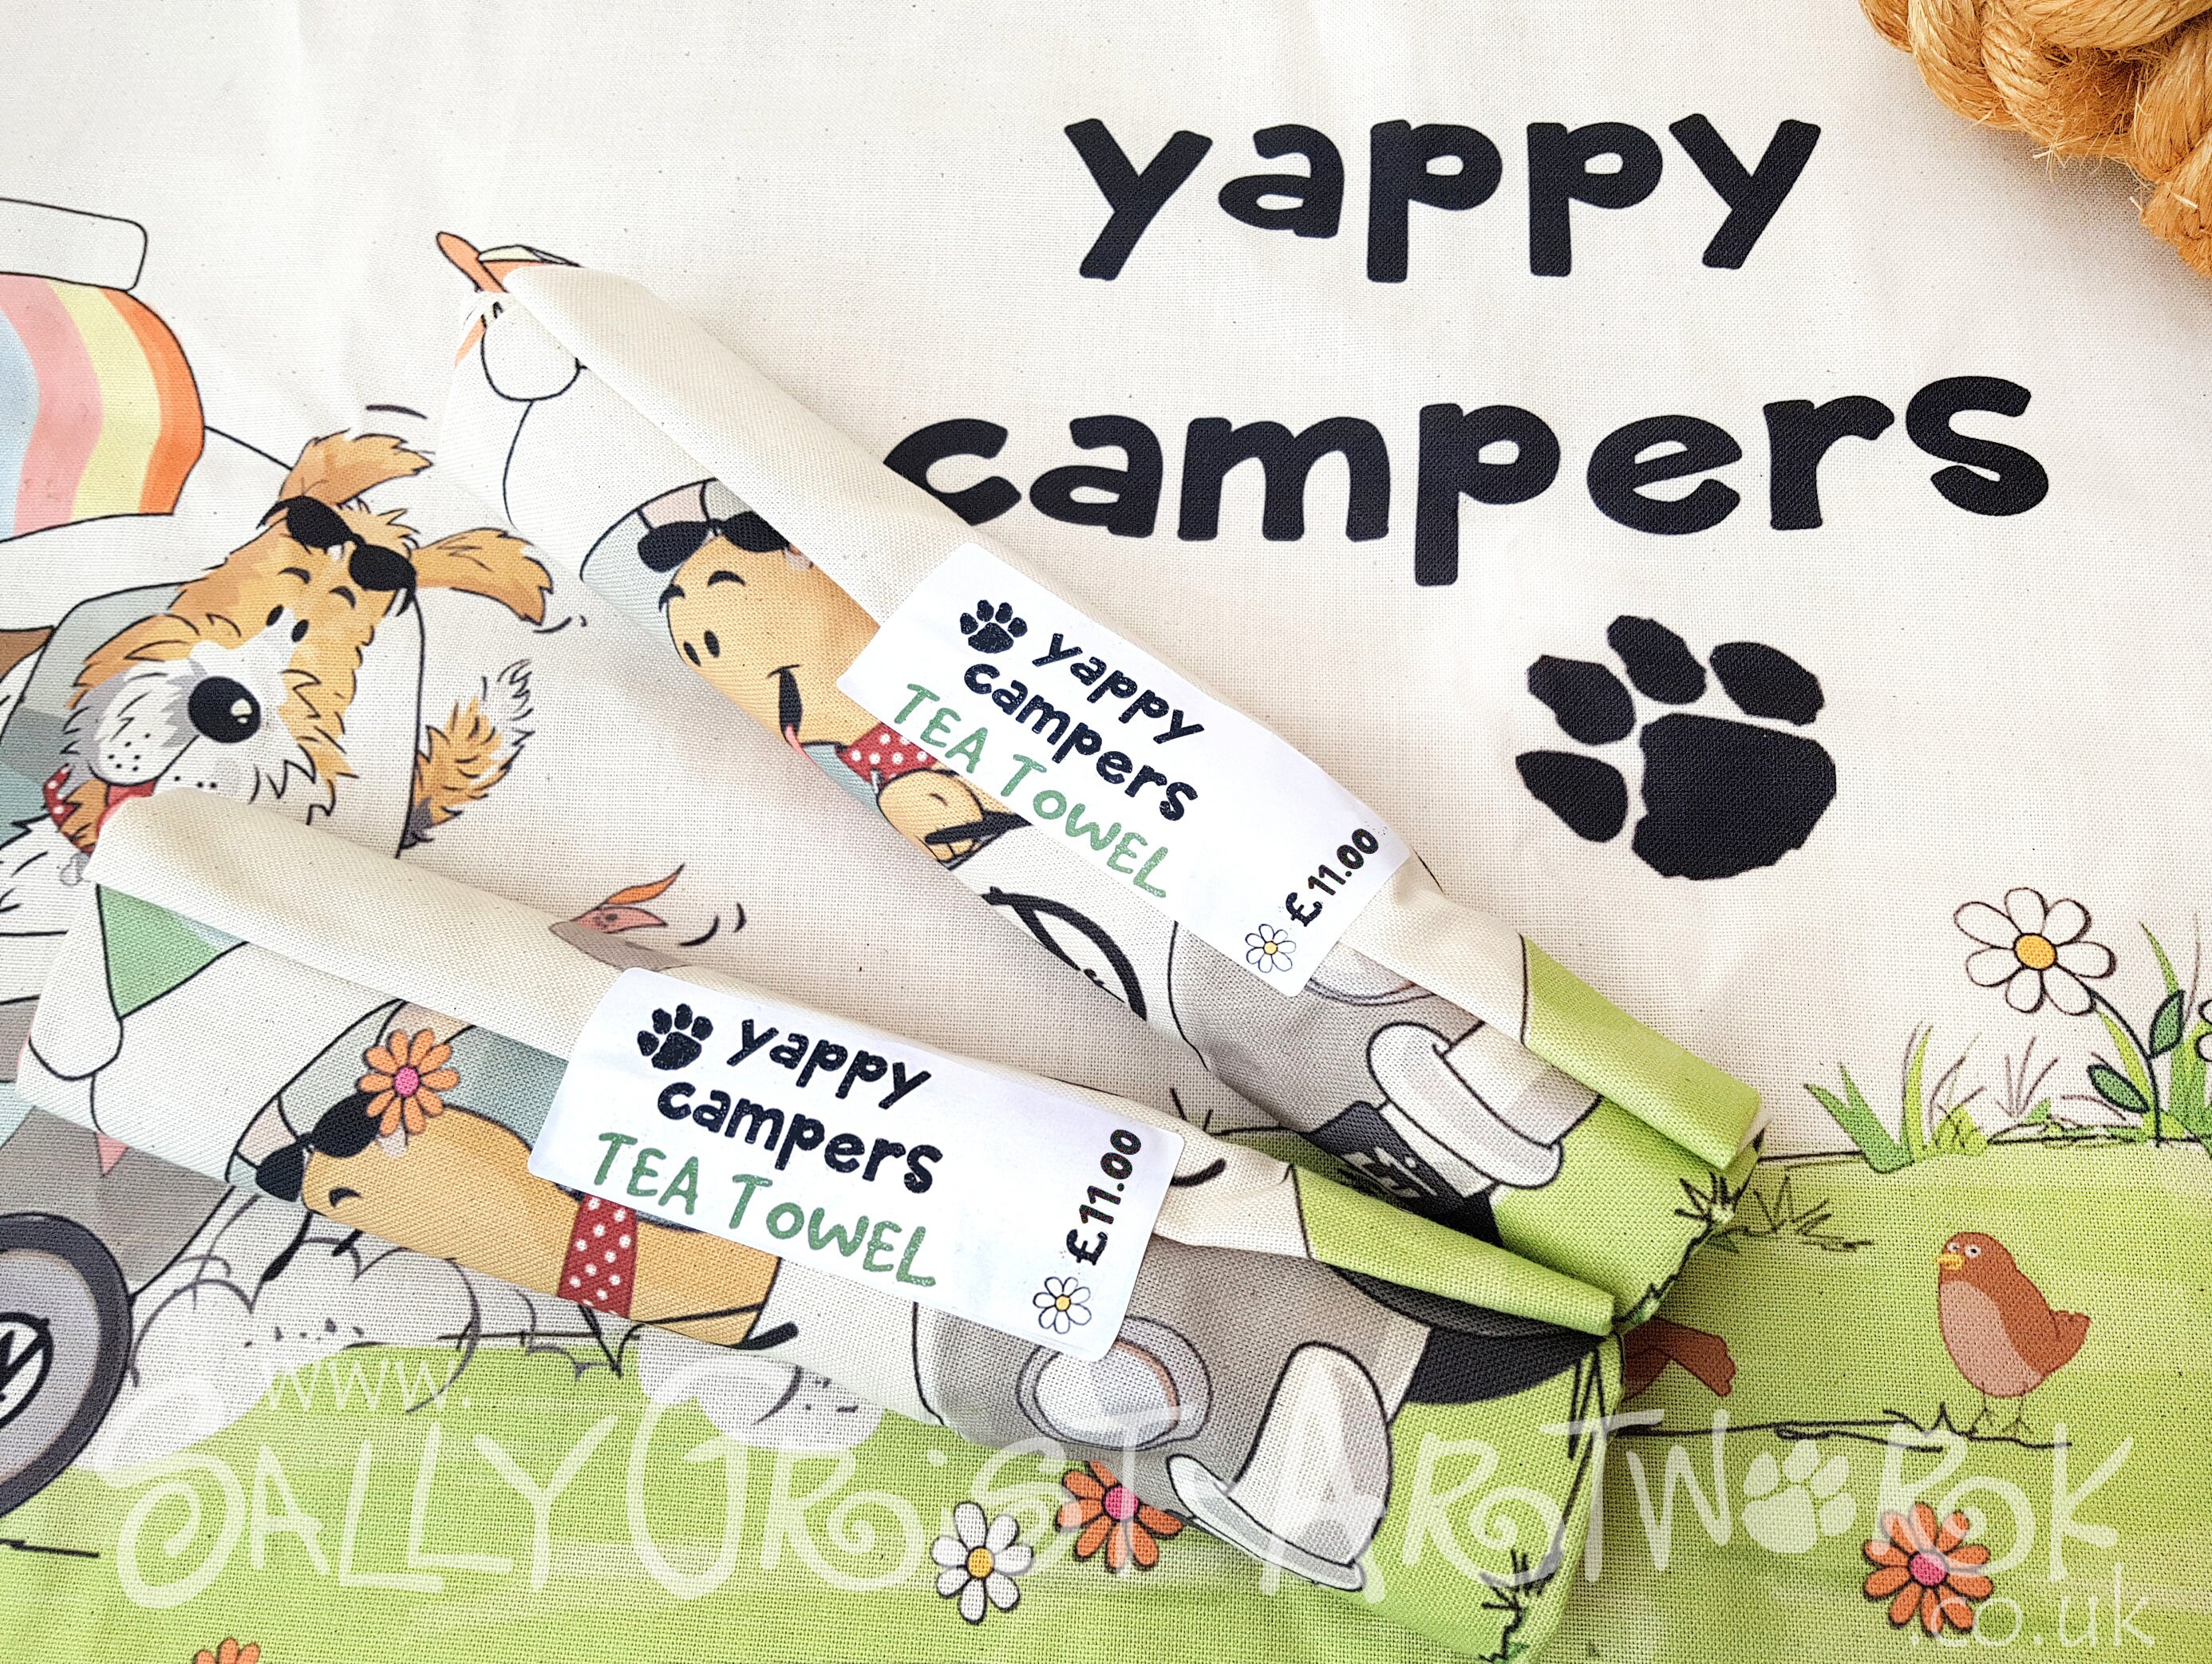 I HEART CAMPING & HAPPY CAMPER Set of 2 Kitchen Tea Towels by Kay Dee 